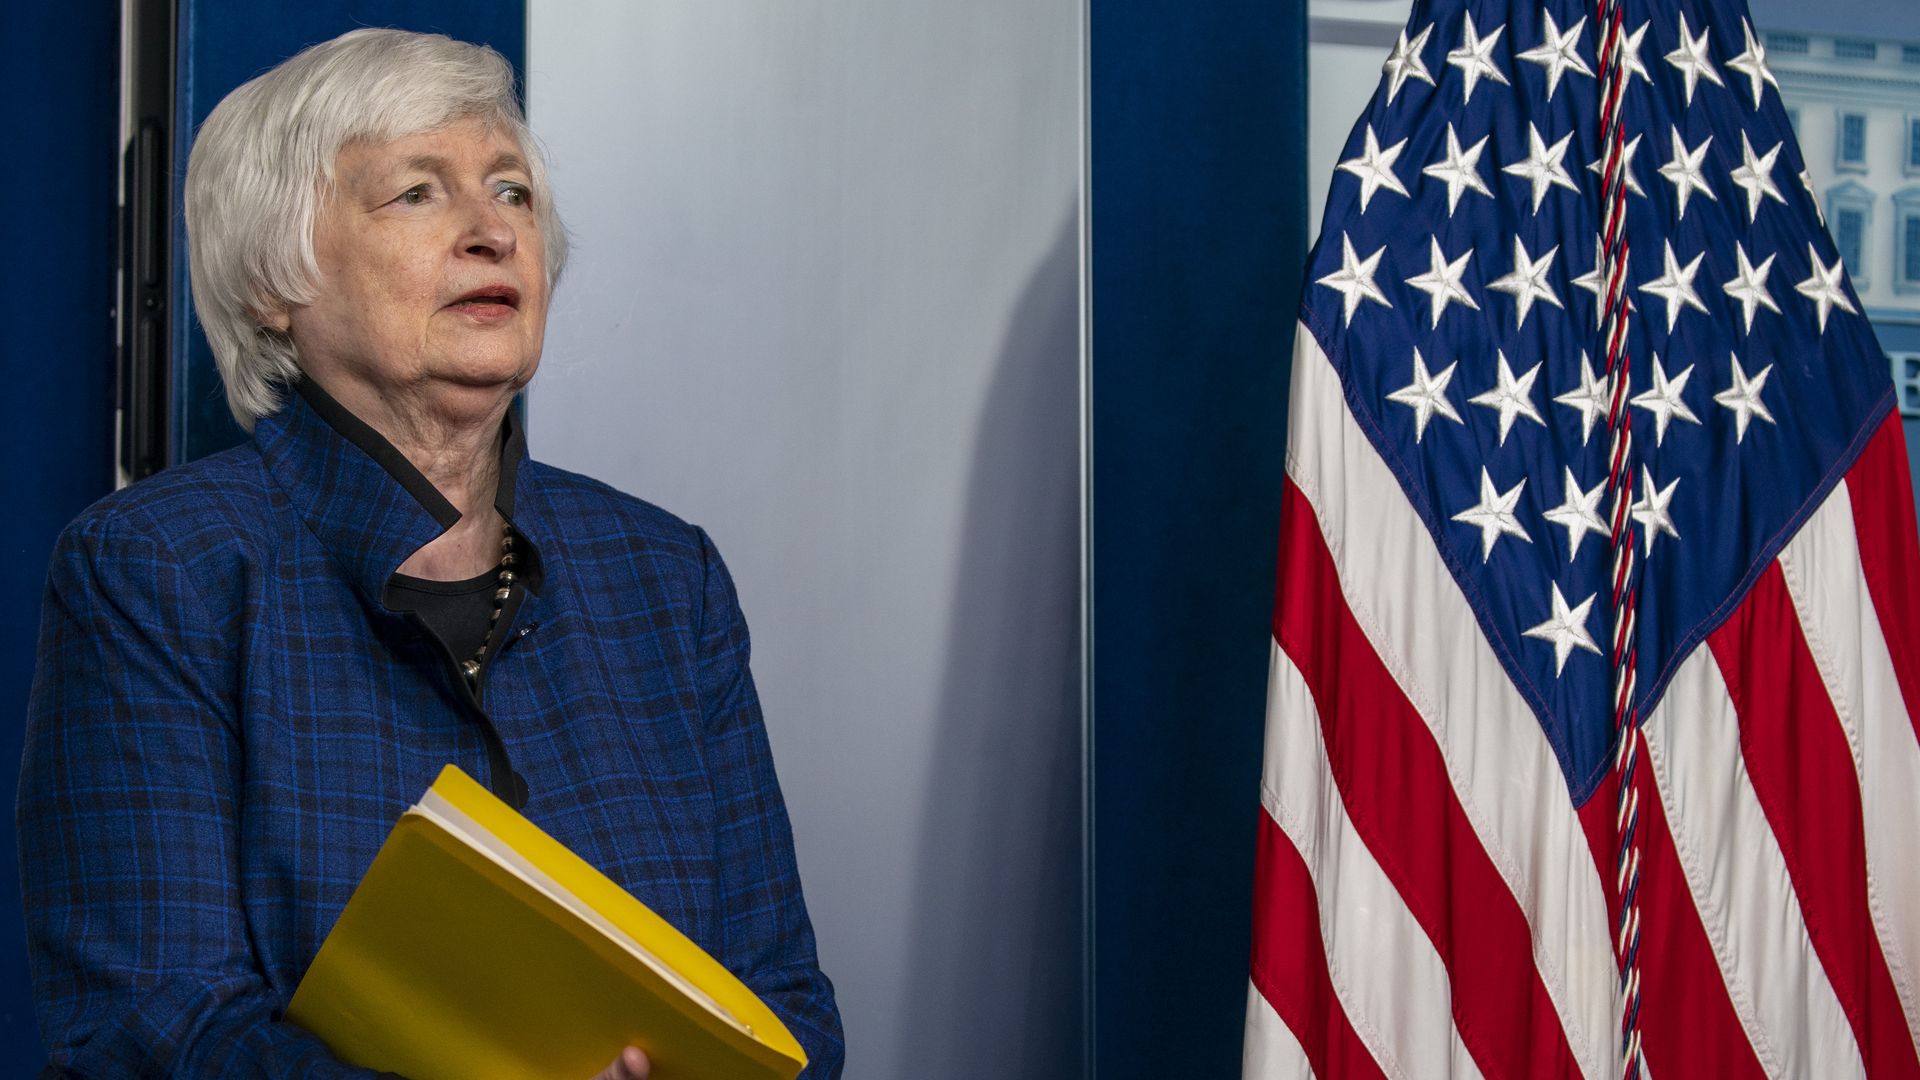 Photo of Janet Yellen holding a yellow folder and standing next to an American flag